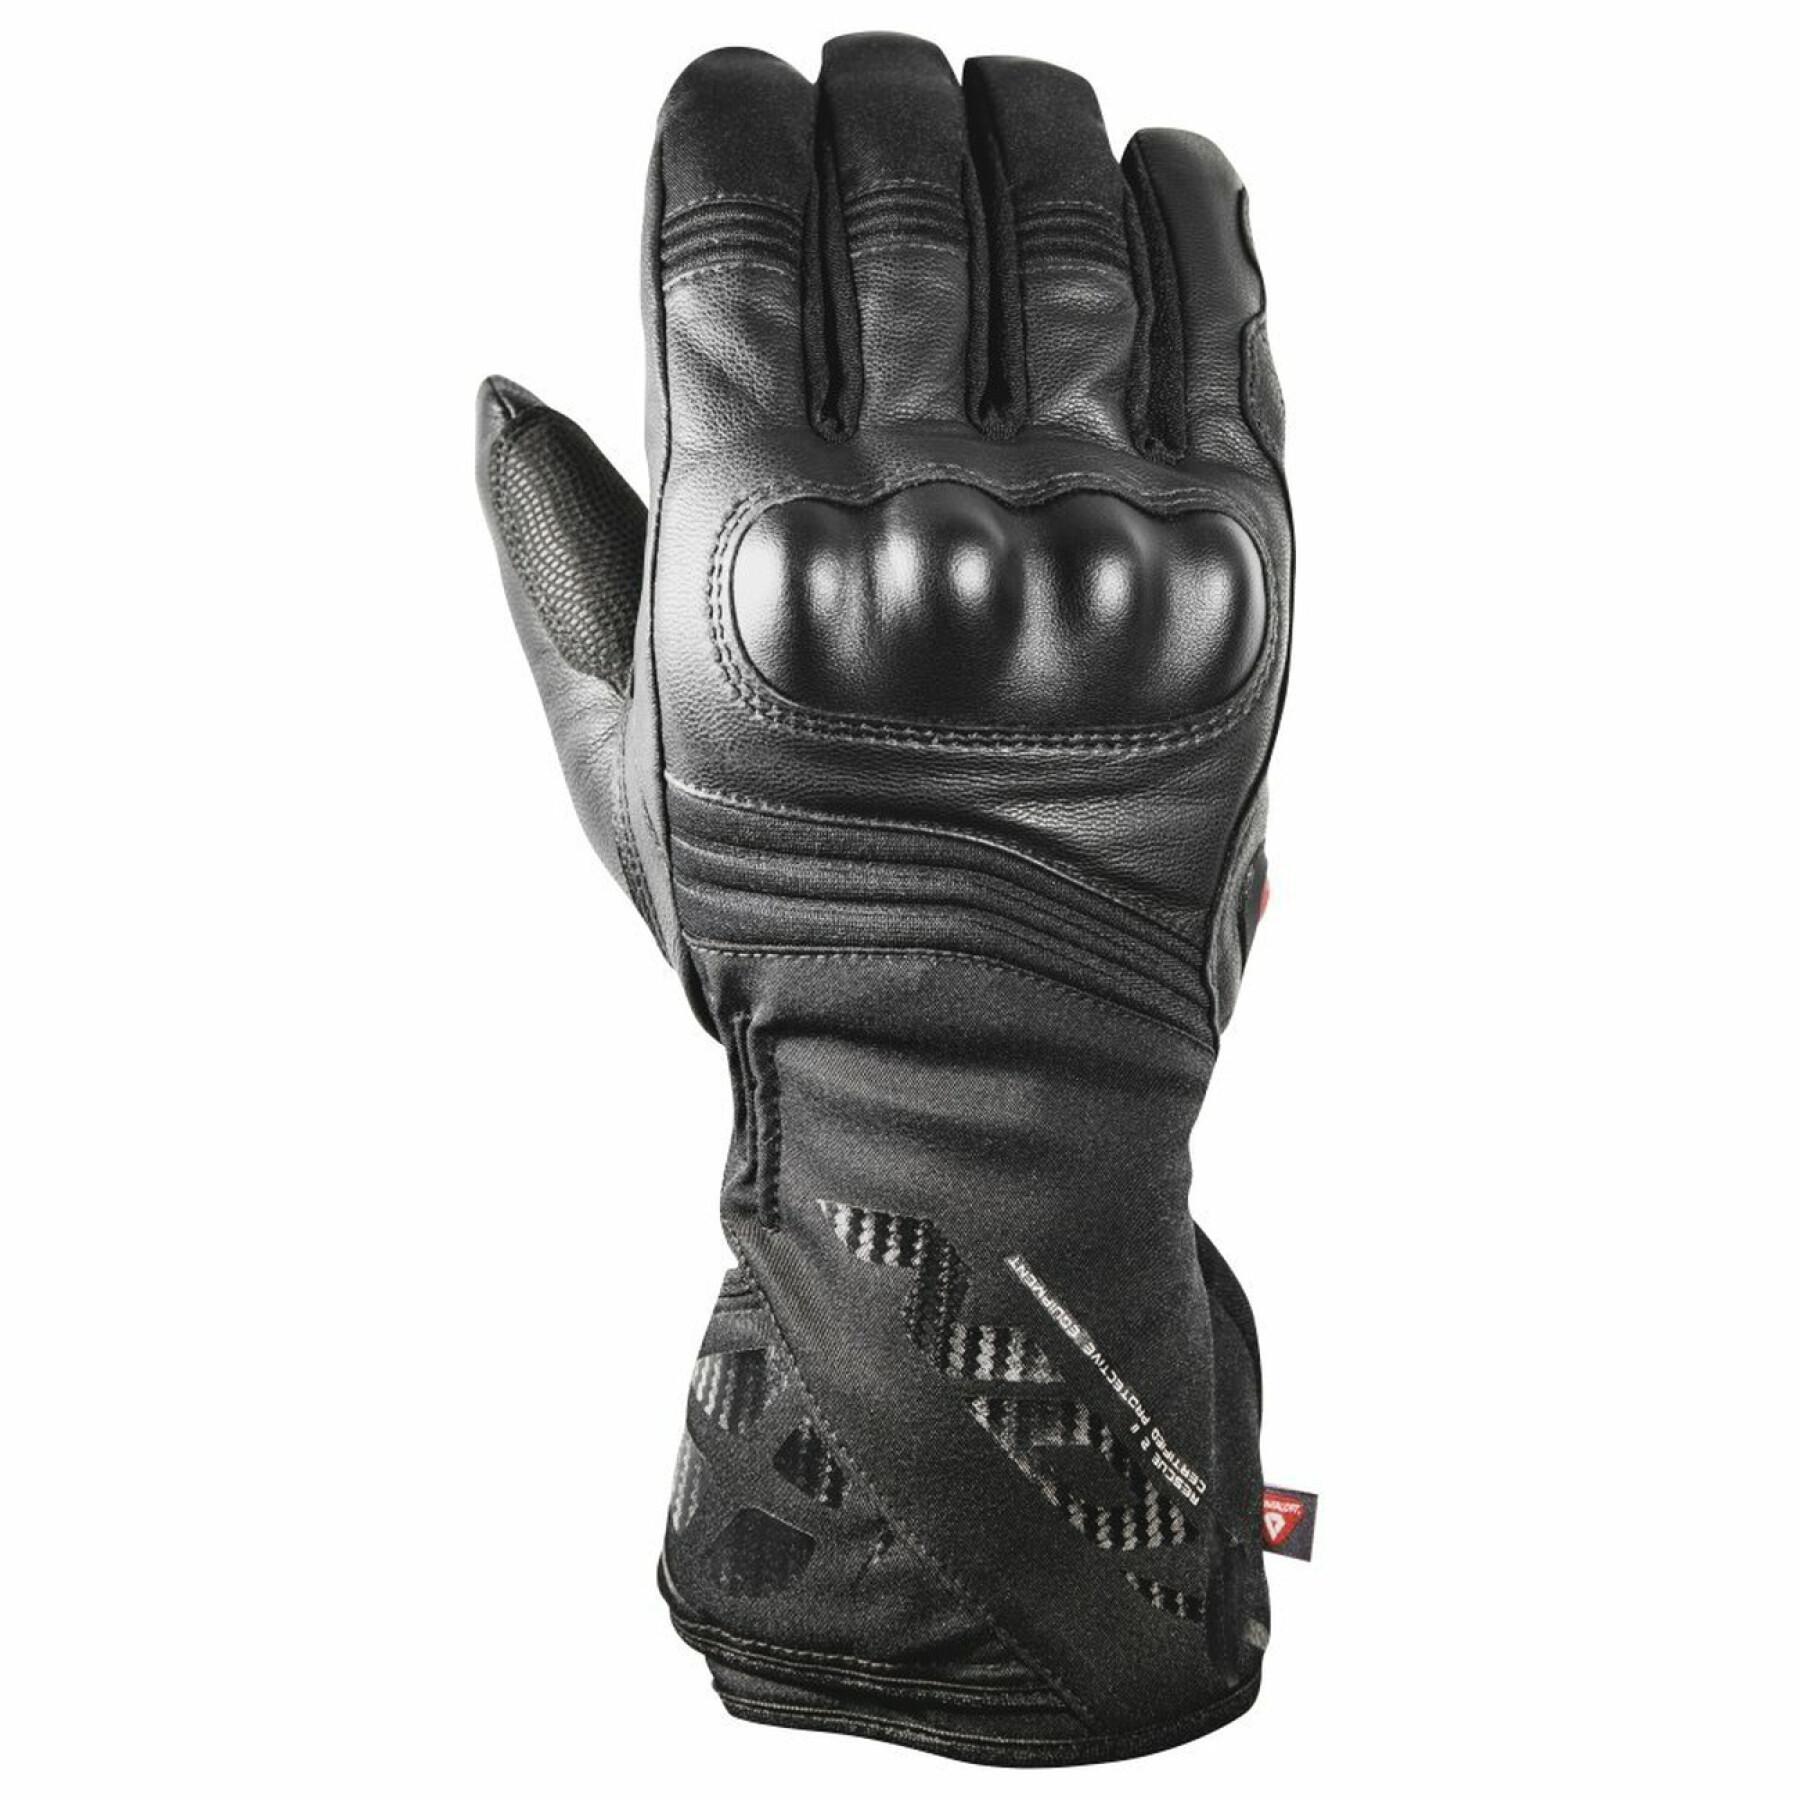 Winter leather motorcycle gloves Ixon pro rescue 2